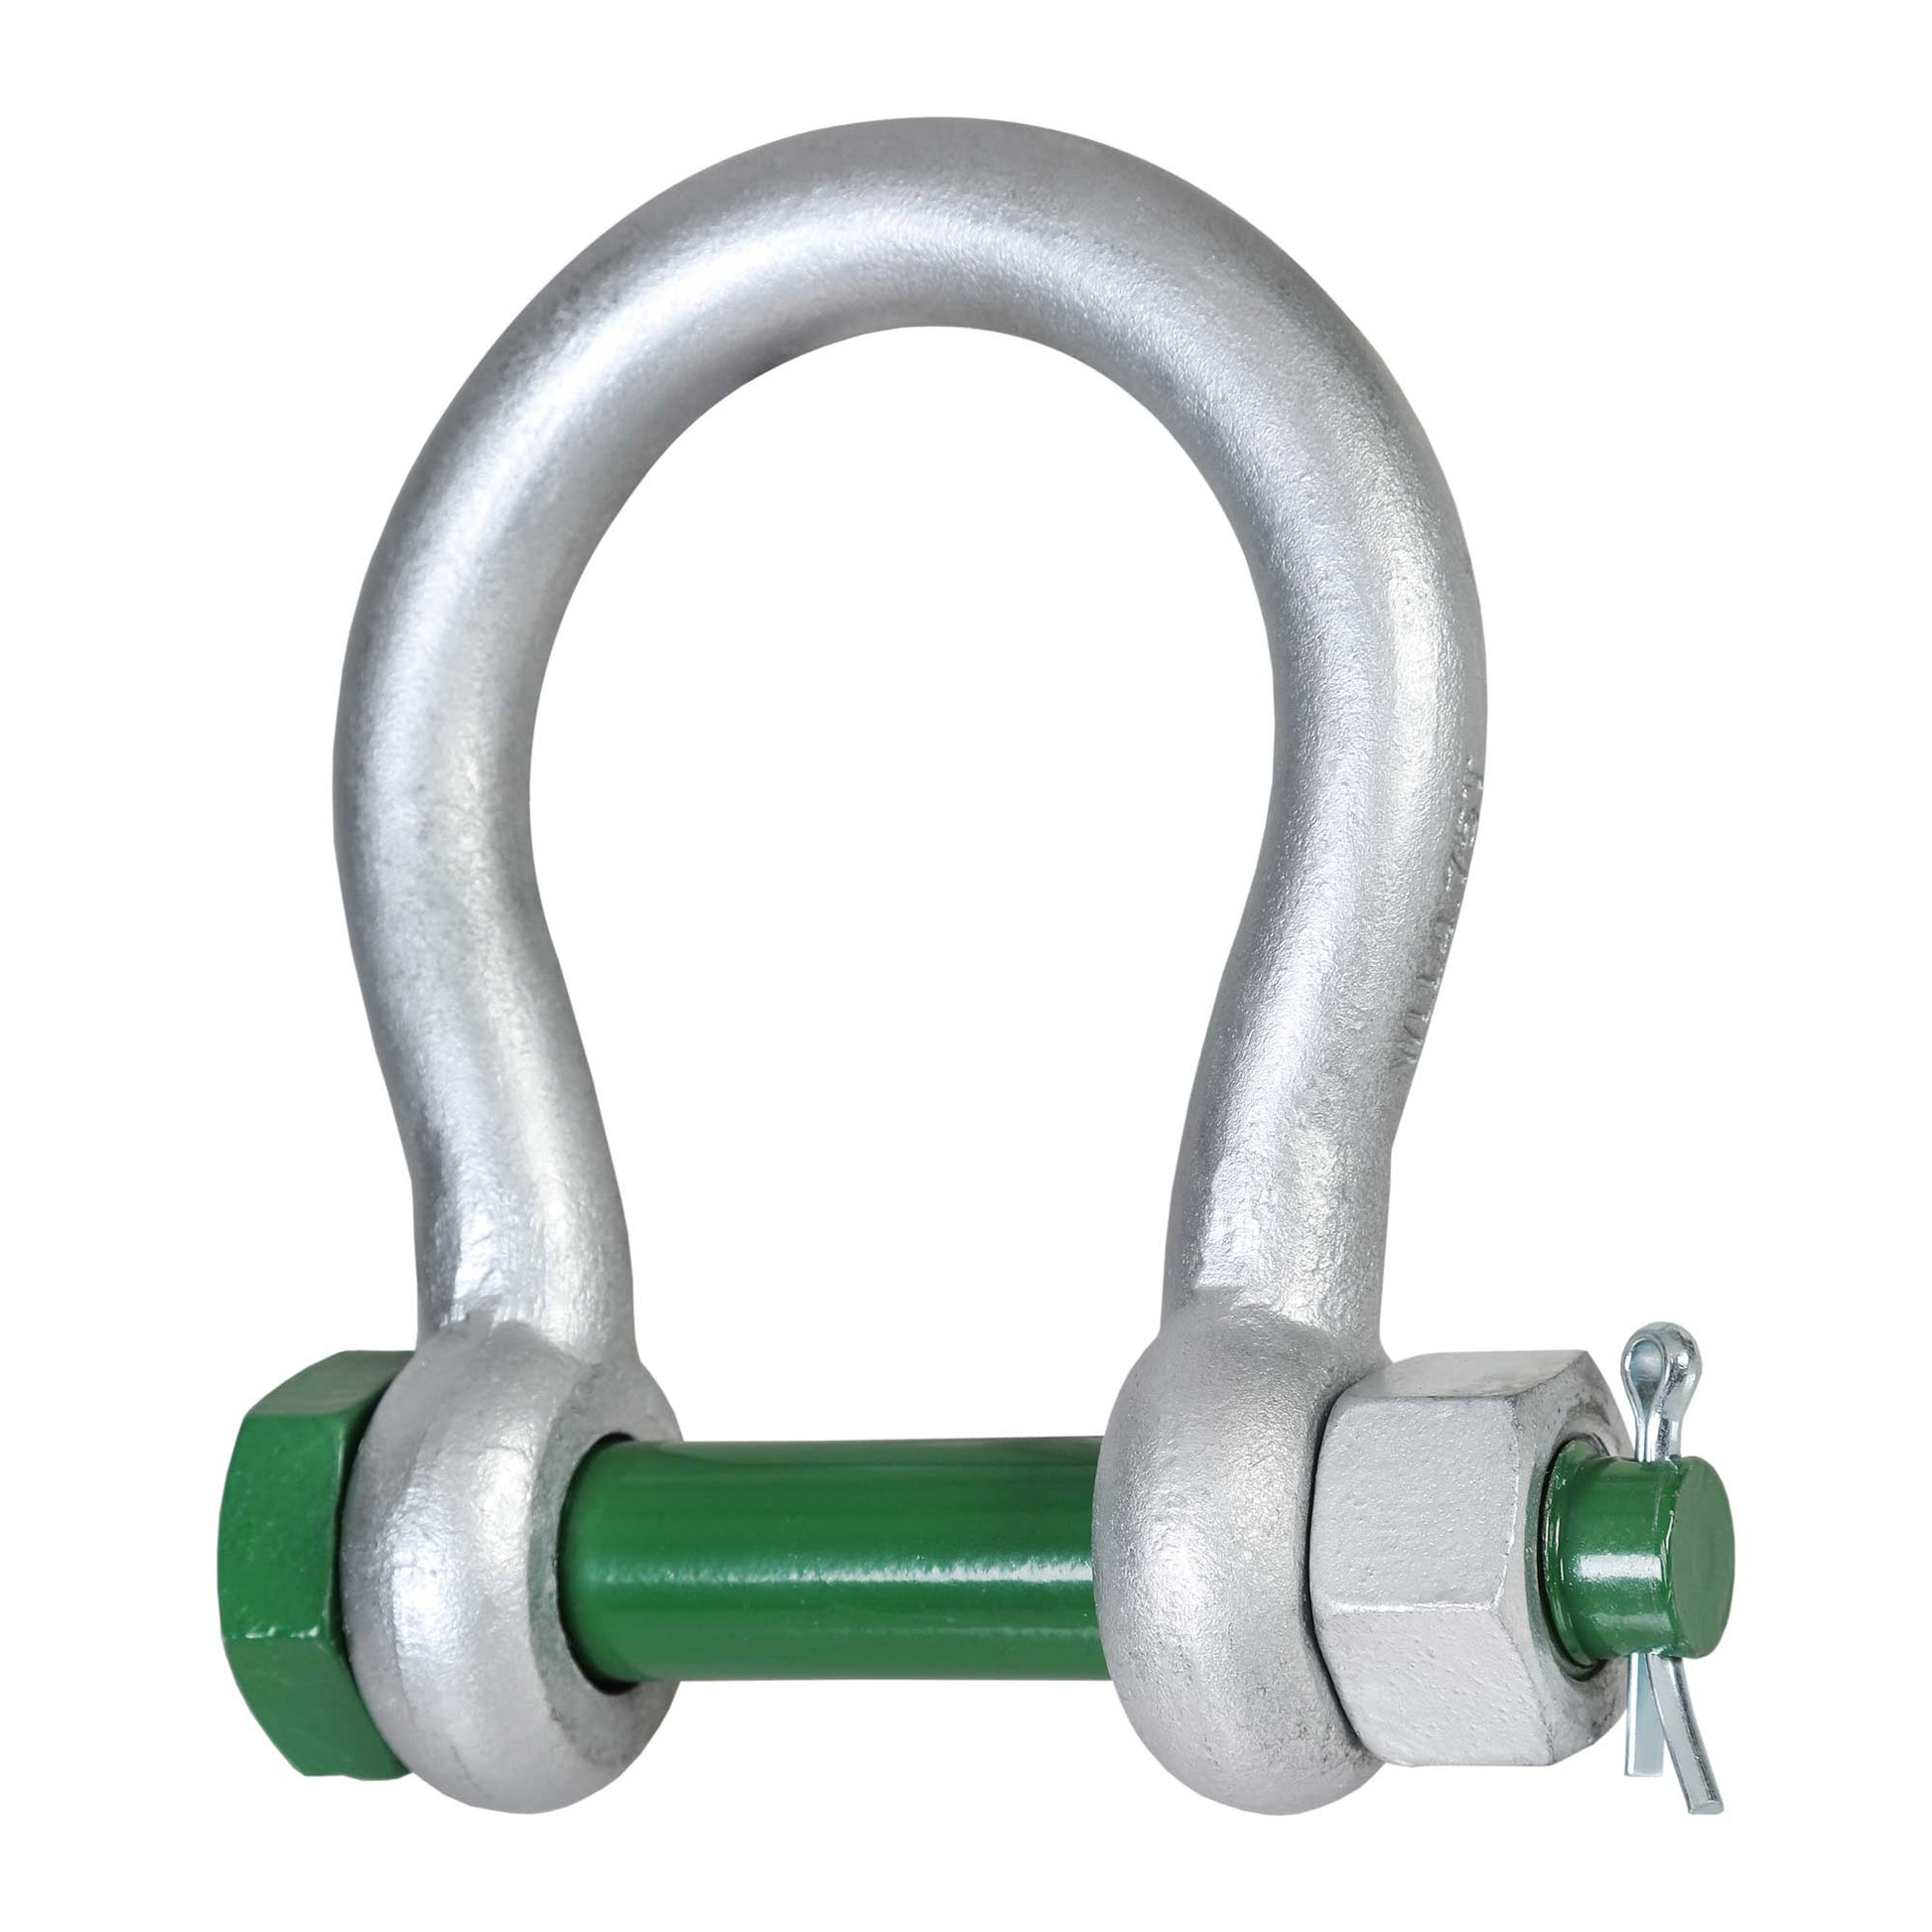 3" Van Beest Green Pin® Bolt Type Wide Mouth Towing Shackle | G-4263 - 75 Ton primary image